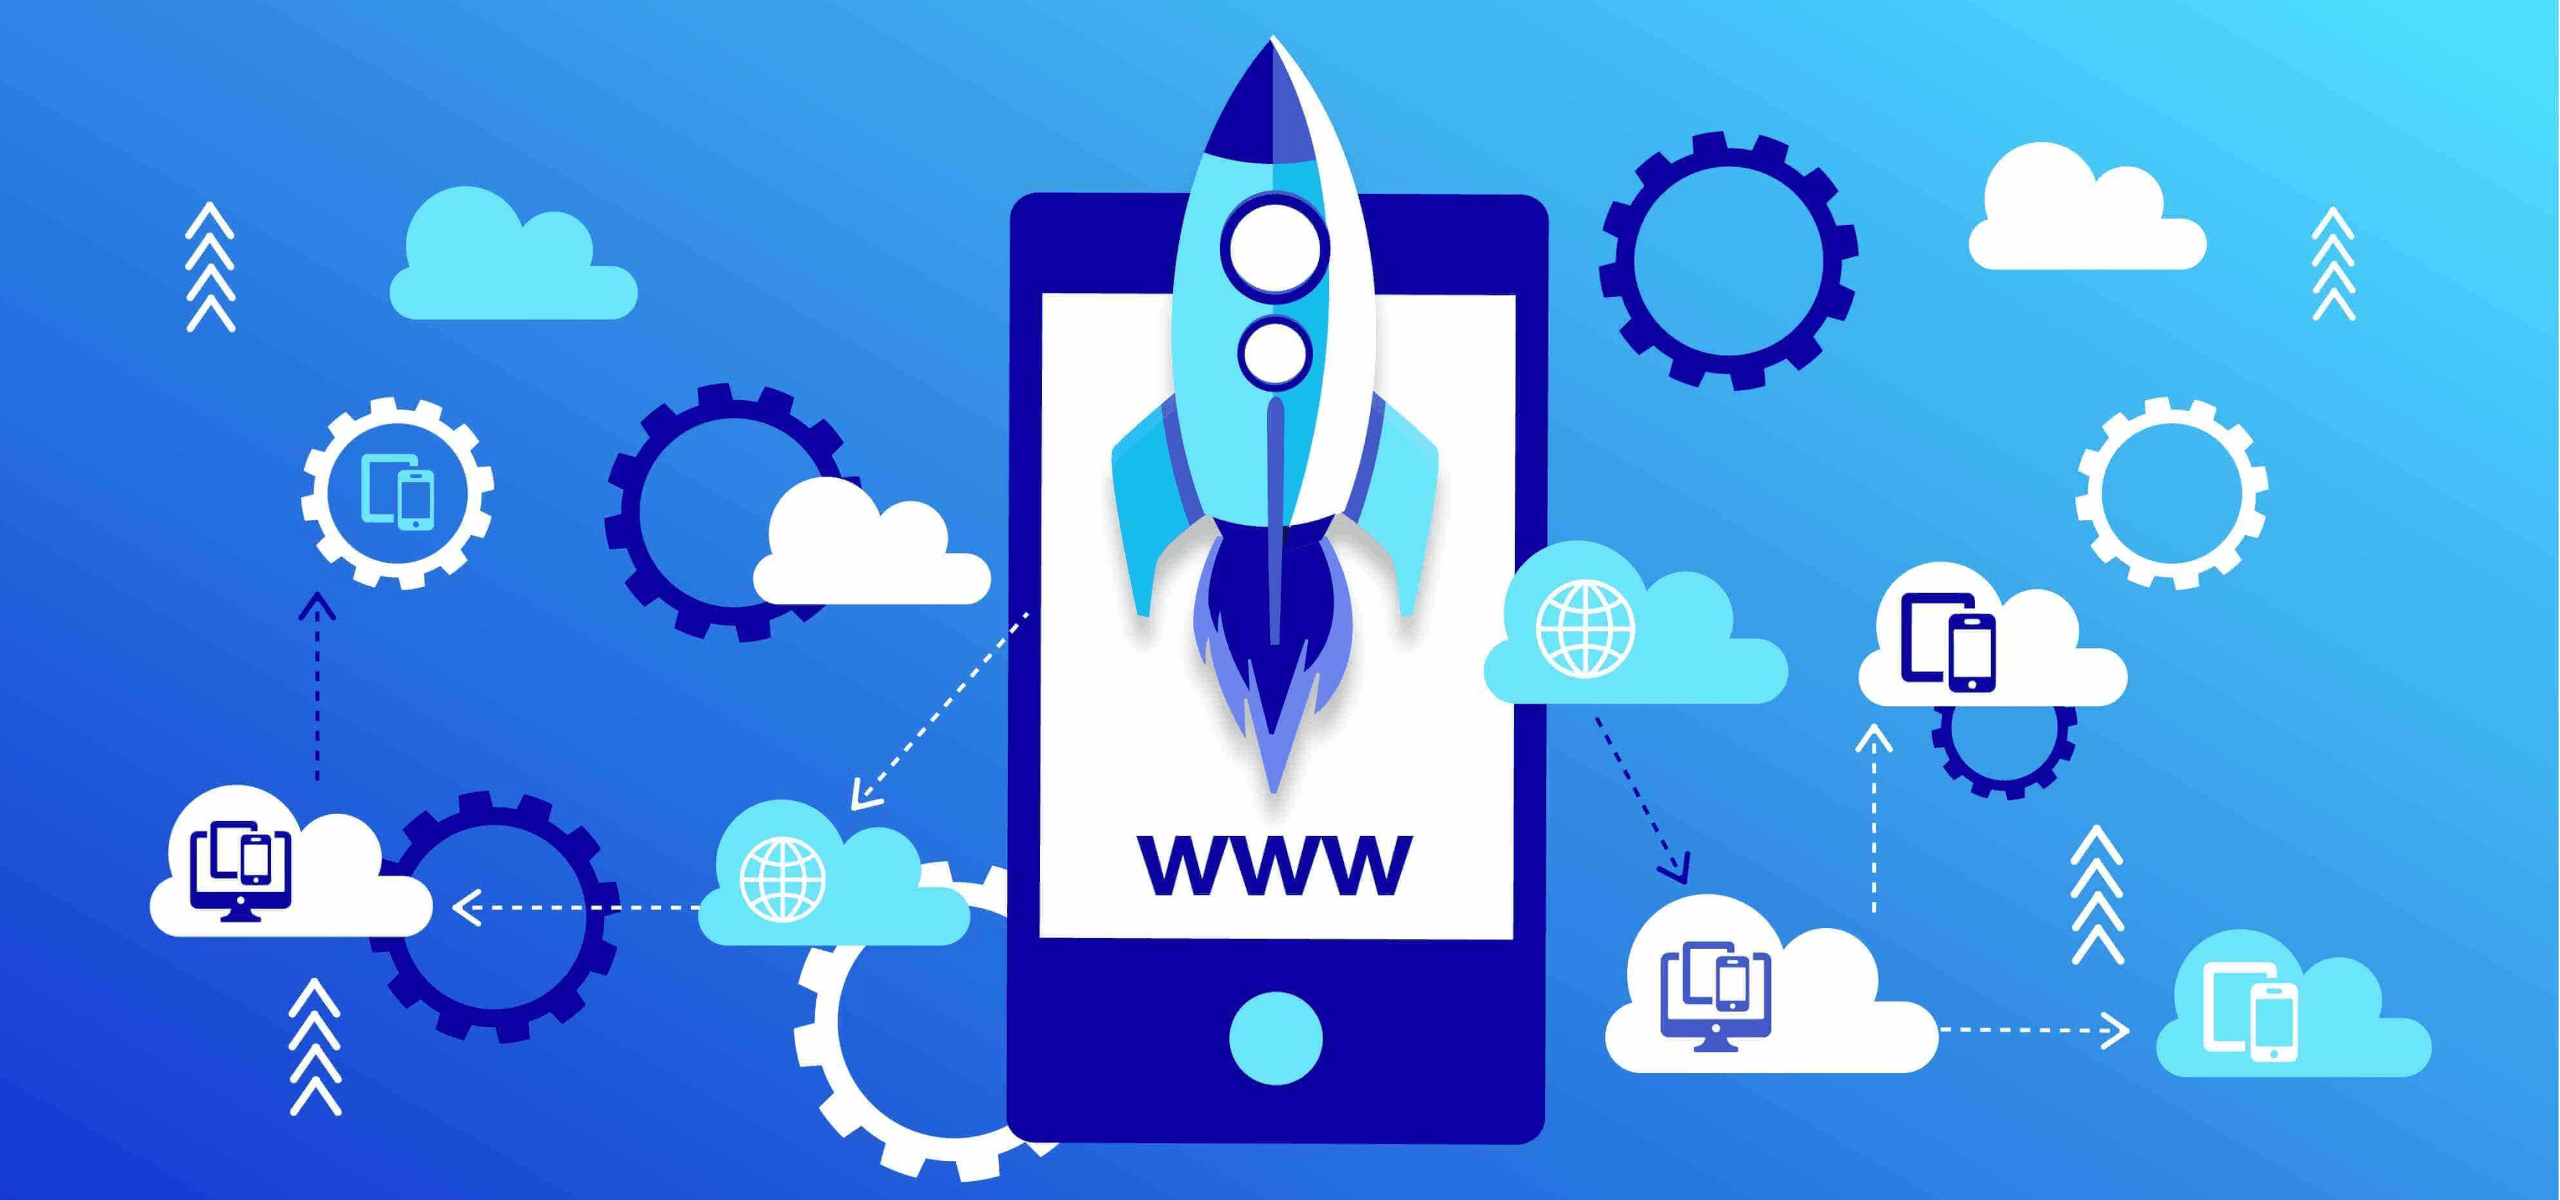 PWA is an innovative solution for your <span>site</span>